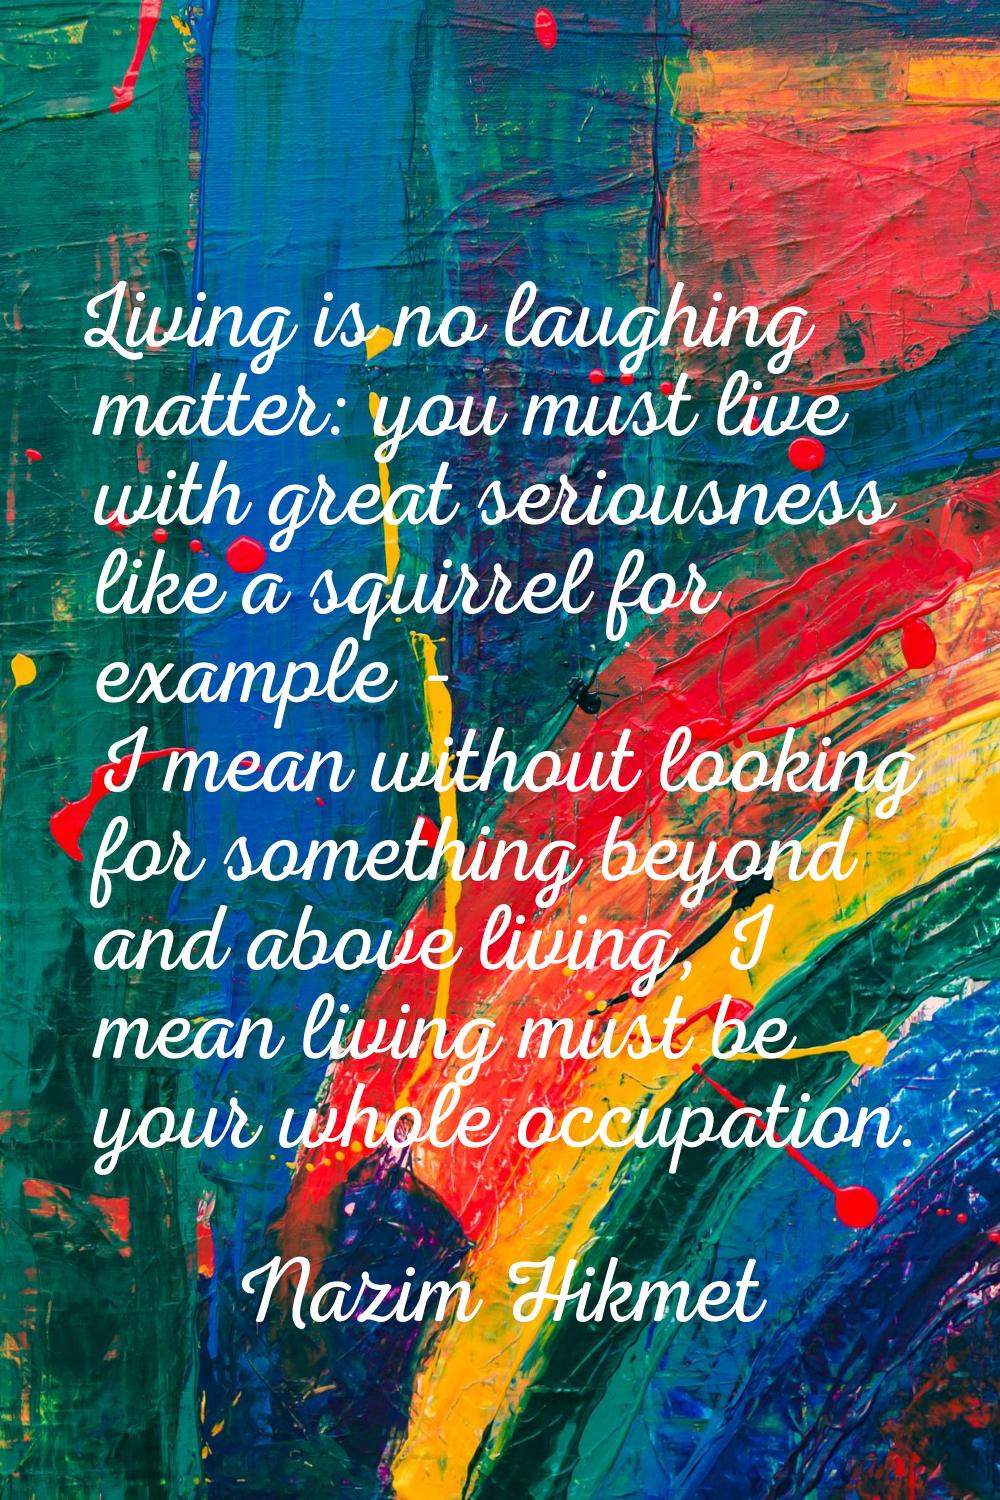 Living is no laughing matter: you must live with great seriousness like a squirrel for example - I 